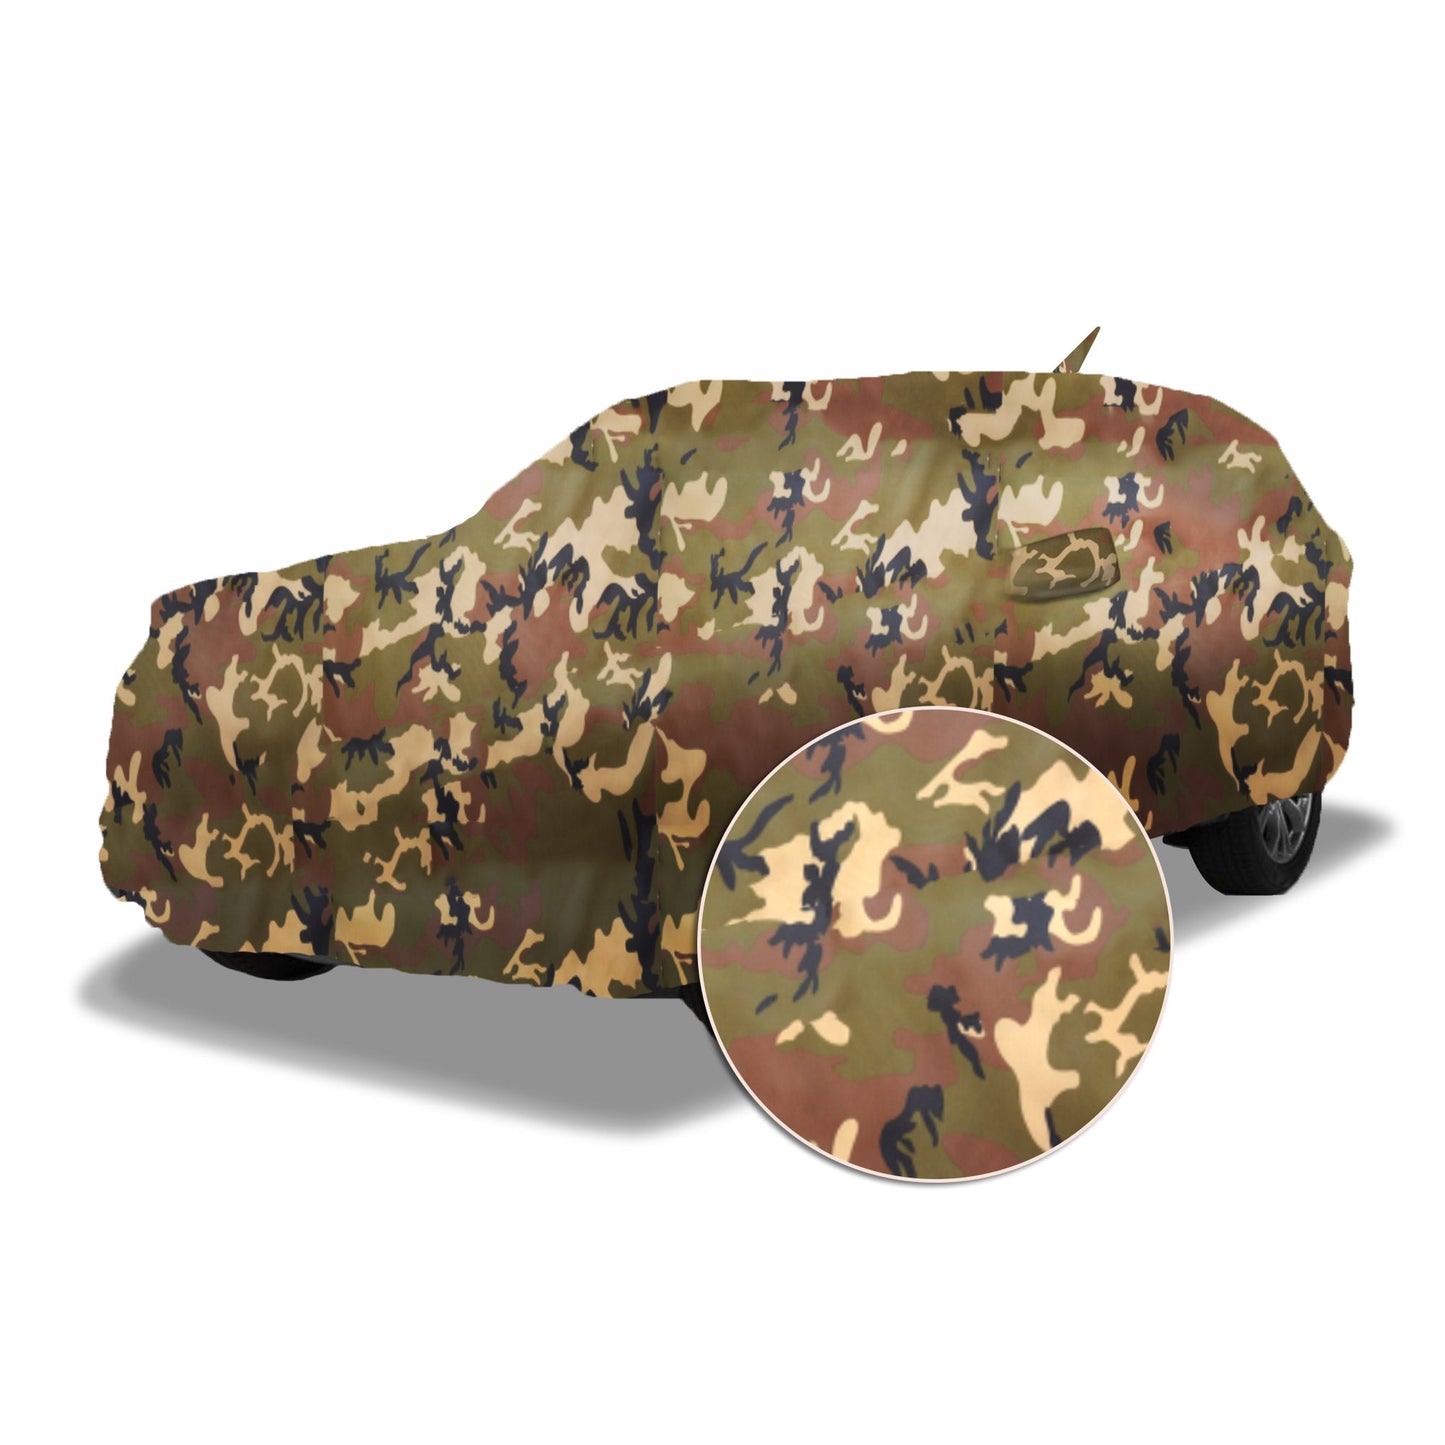 Ascot BMW X6 2008-2014 Model Car Body Cover Extra Strong & Dust Proof Jungle Military Car Cover with UV Proof & Water-Resistant Coating